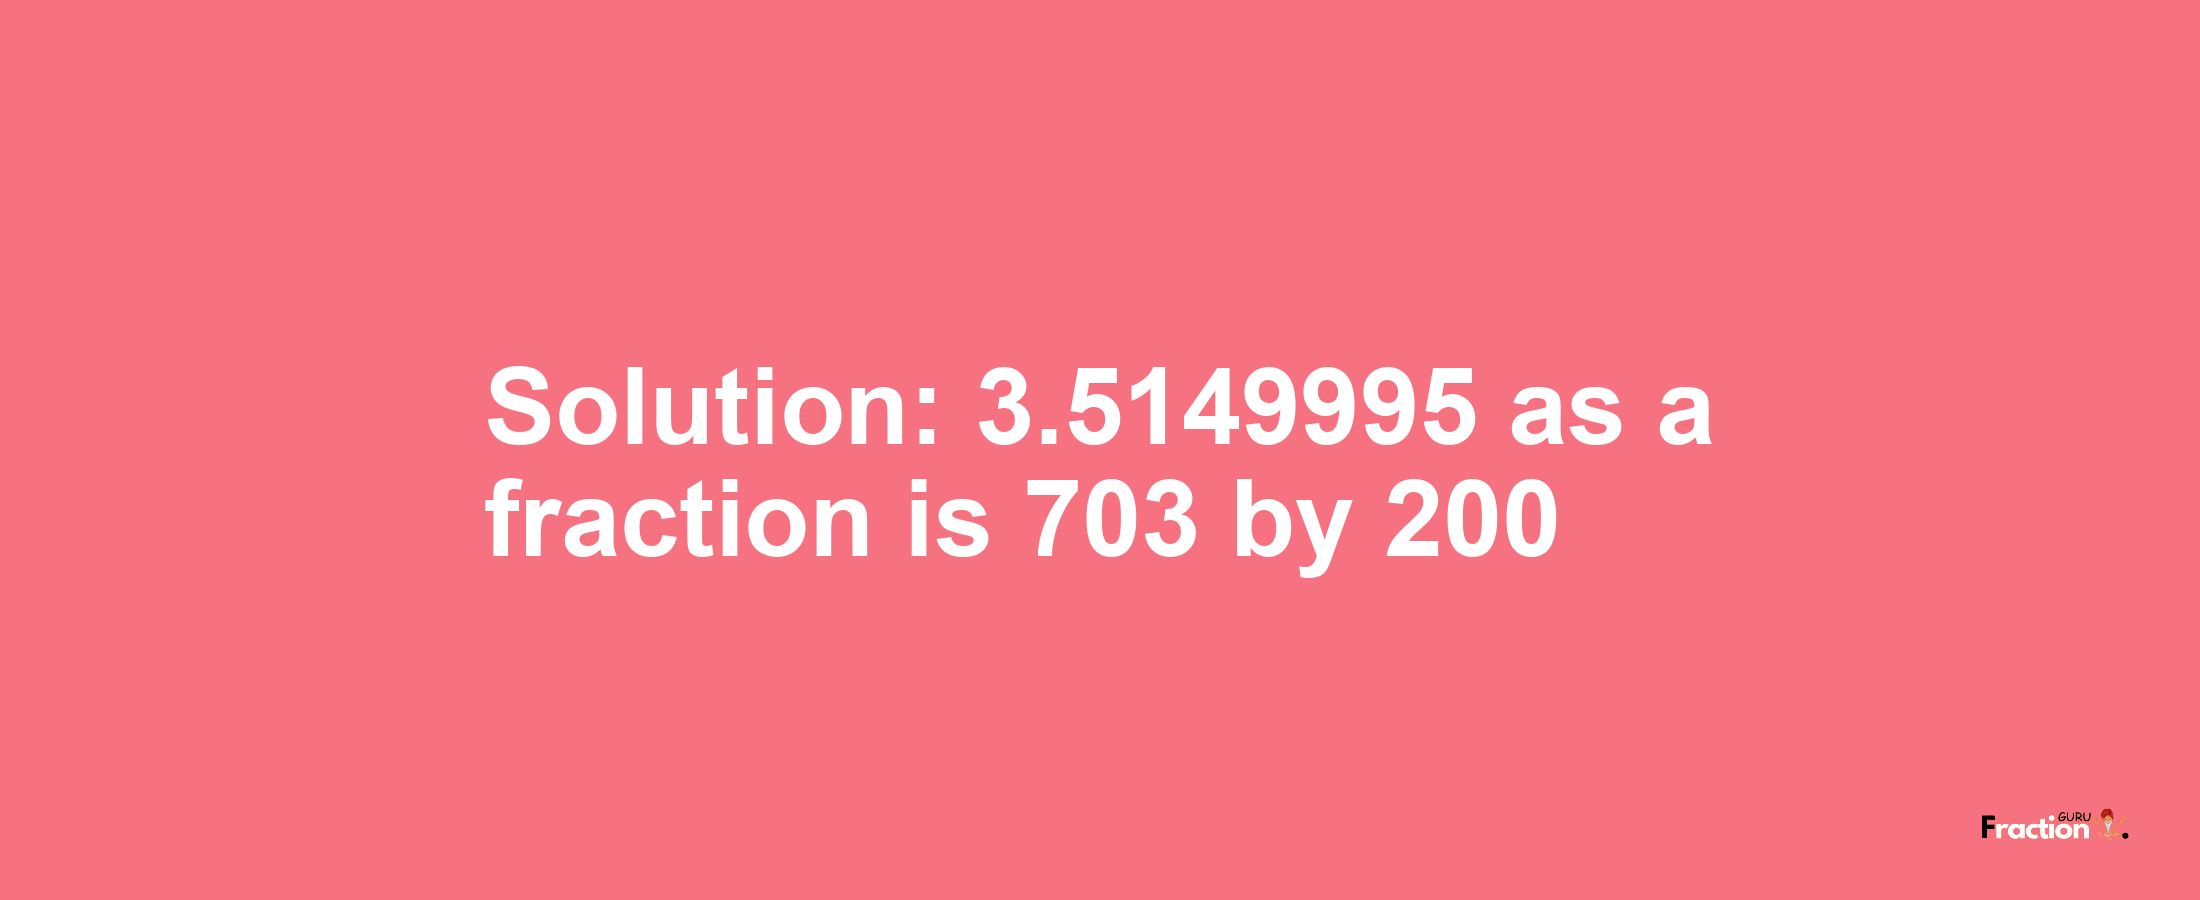 Solution:3.5149995 as a fraction is 703/200